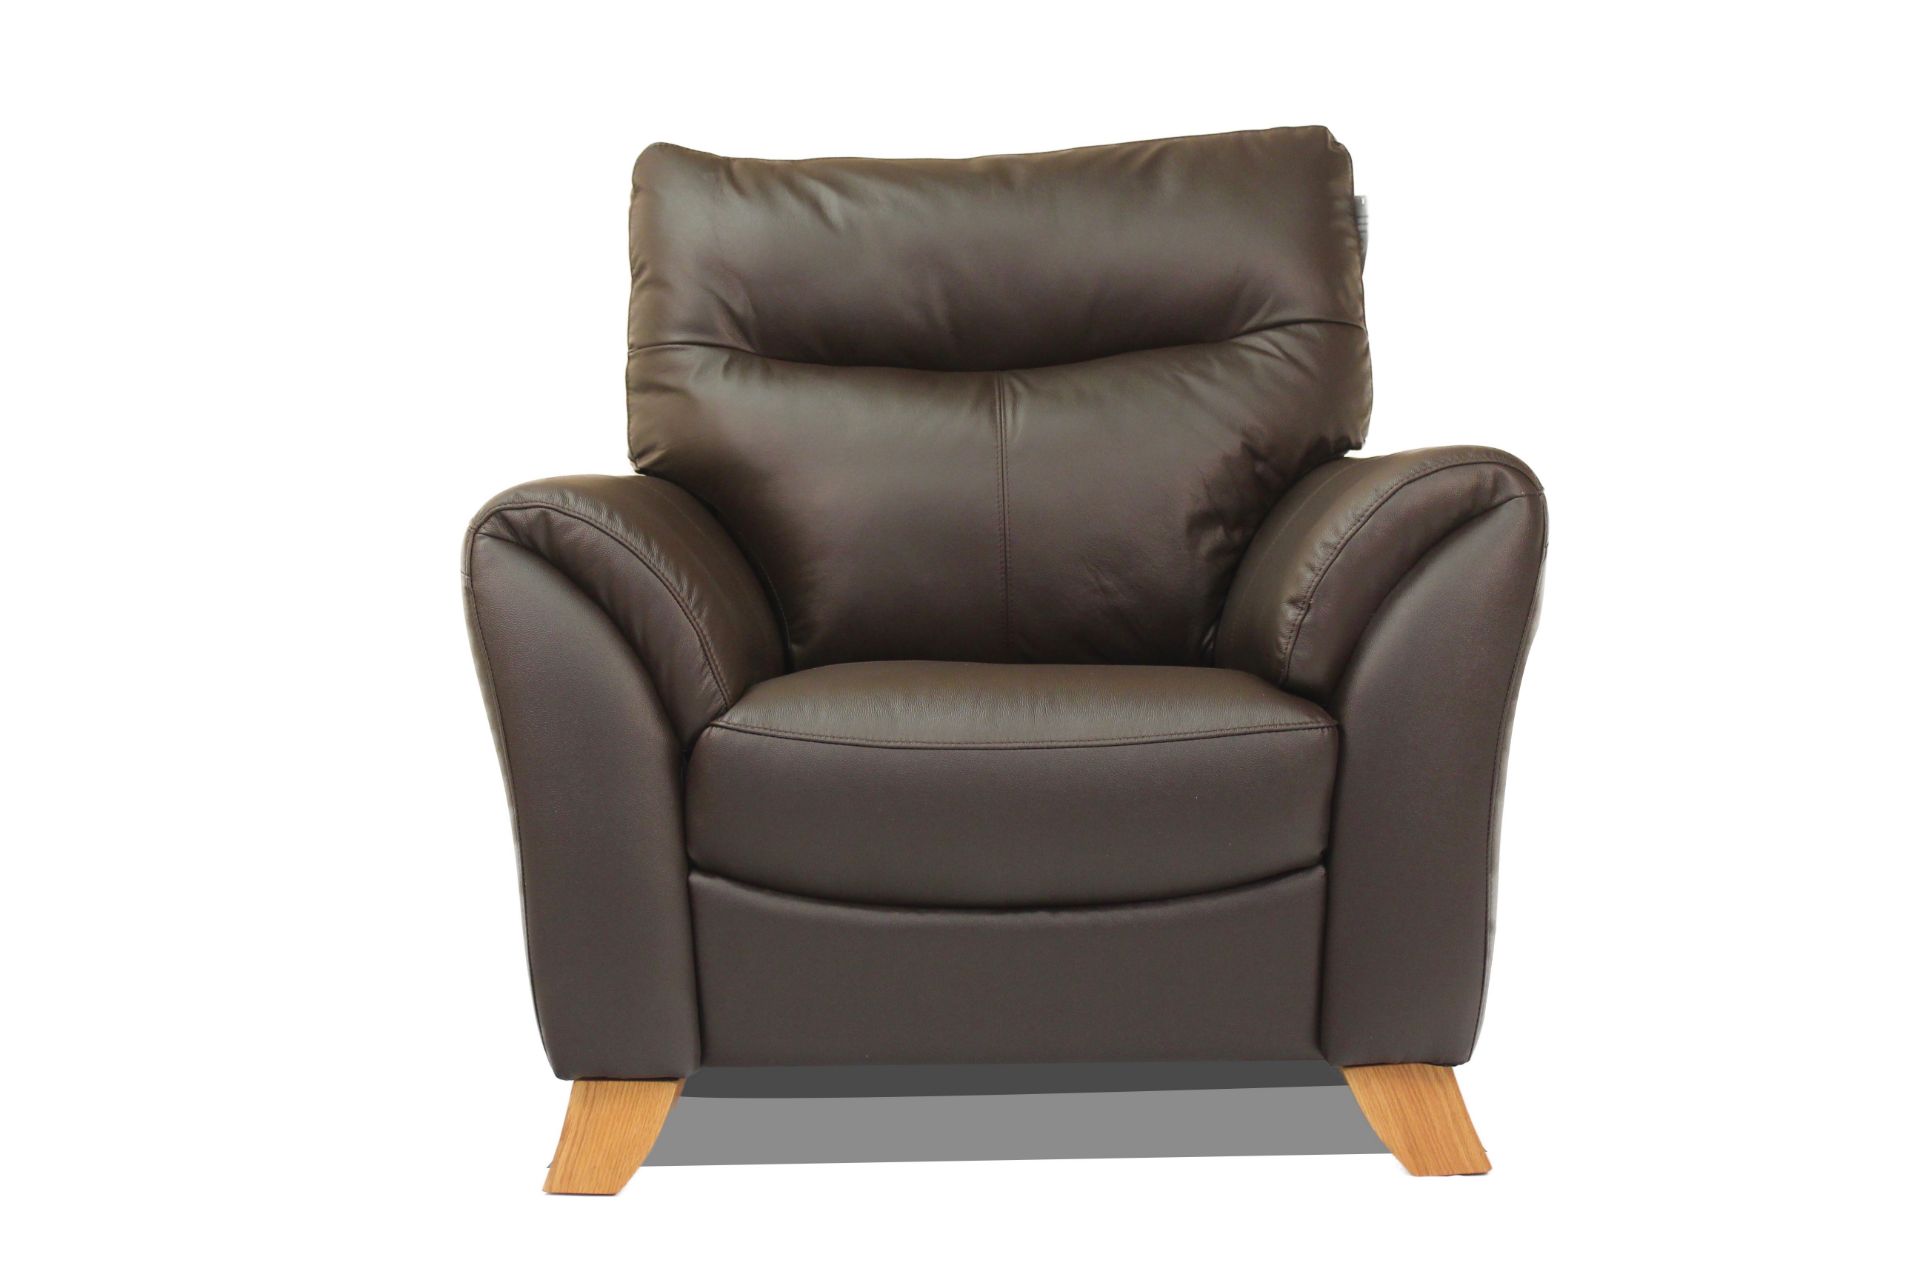 Brand new and boxed Cottesmore Brown Leather Arm Chair - Image 2 of 3